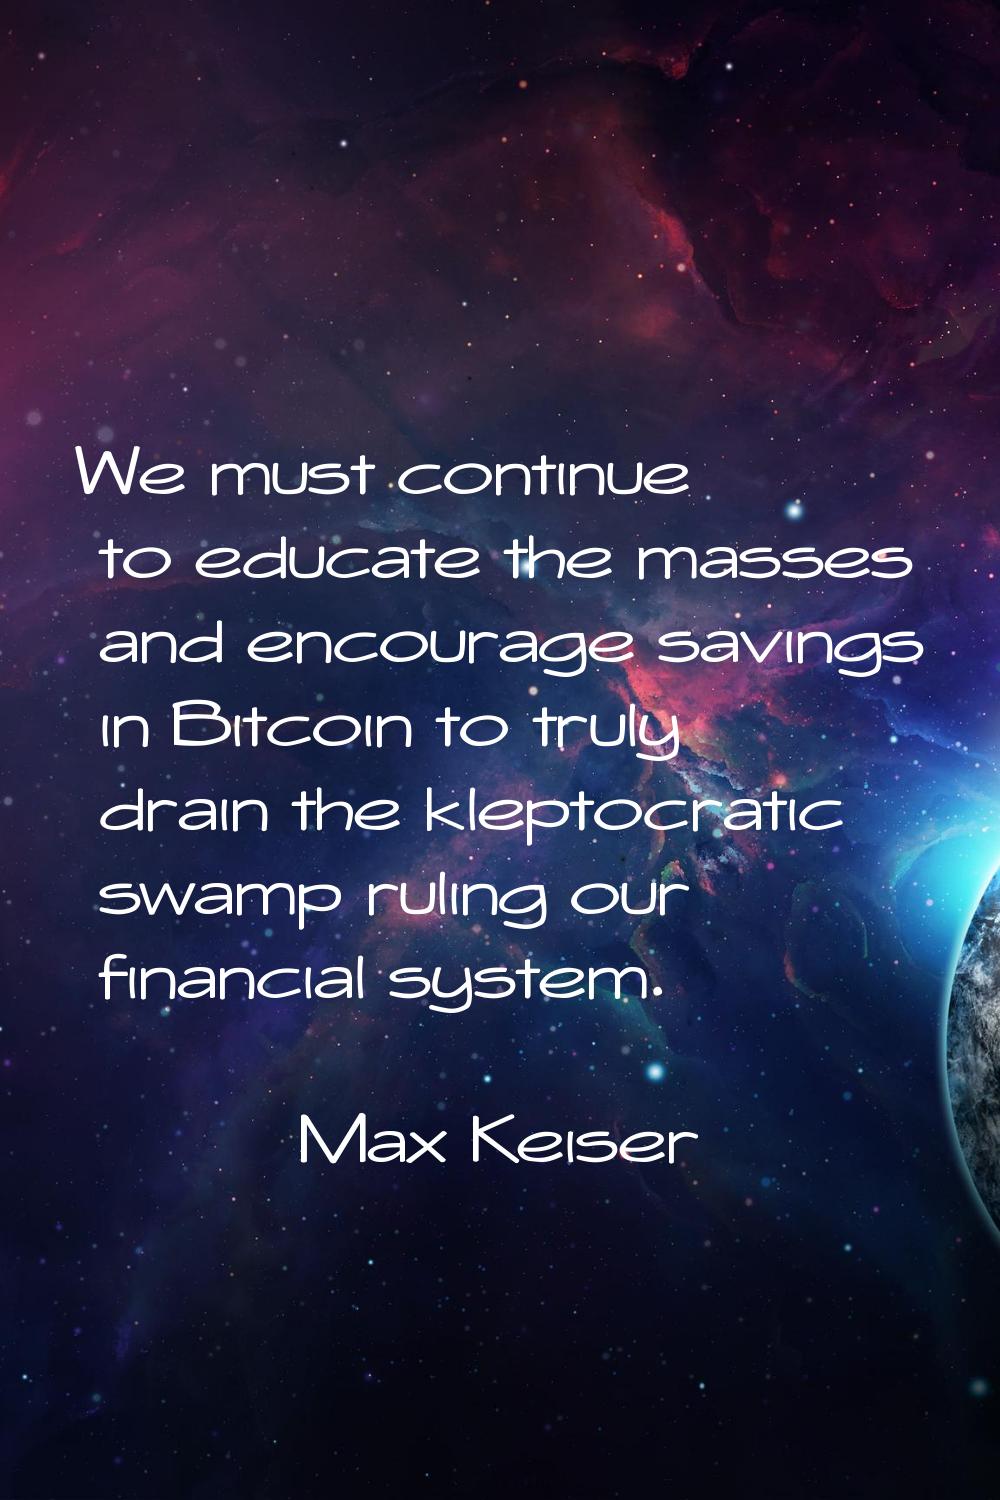 We must continue to educate the masses and encourage savings in Bitcoin to truly drain the kleptocr